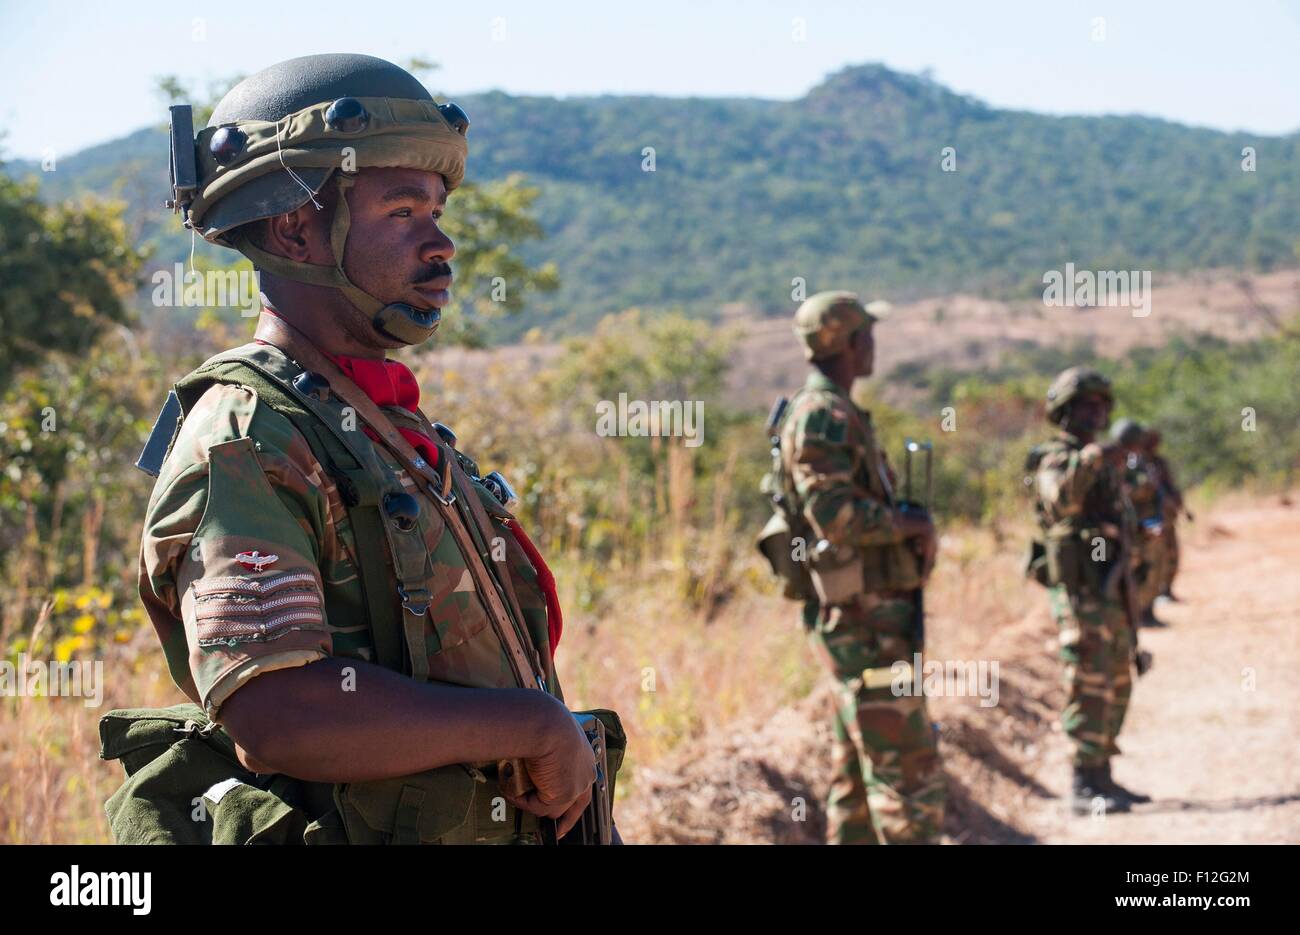 Zambian Defense Force soldier during exercise Southern Accord August 4, 2015 in Lusaka, Zambia. The annual exercise is a joint peacekeeping training with the U.S. Military, United Nation allies and the Zambian Defense Forces. Stock Photo